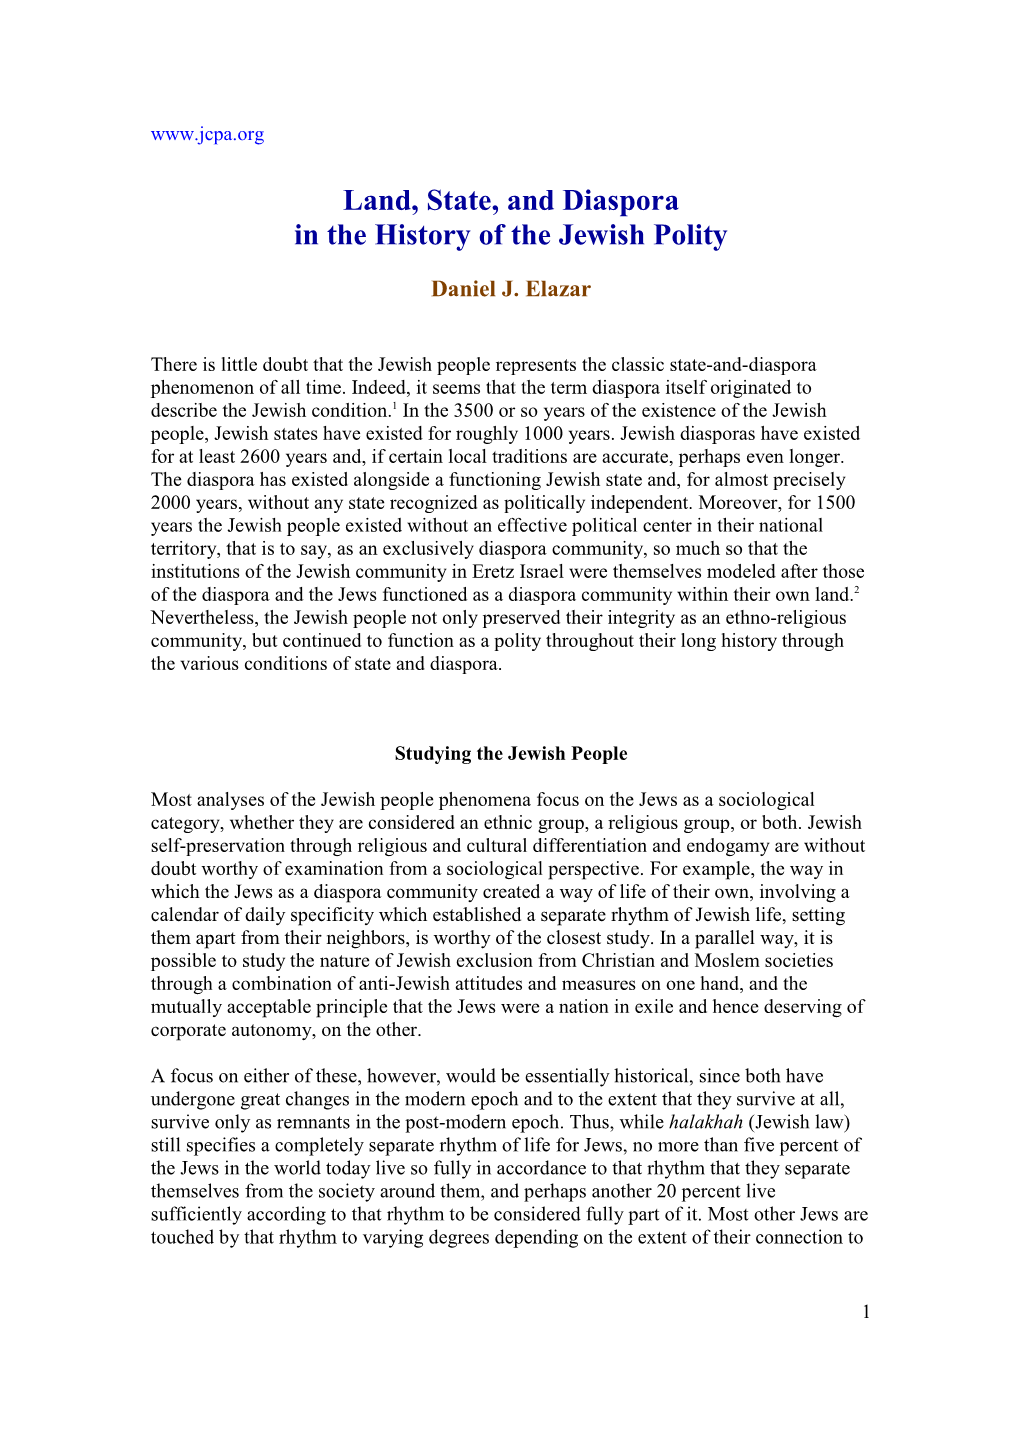 Land, State, and Diaspora in the History of the Jewish Polity